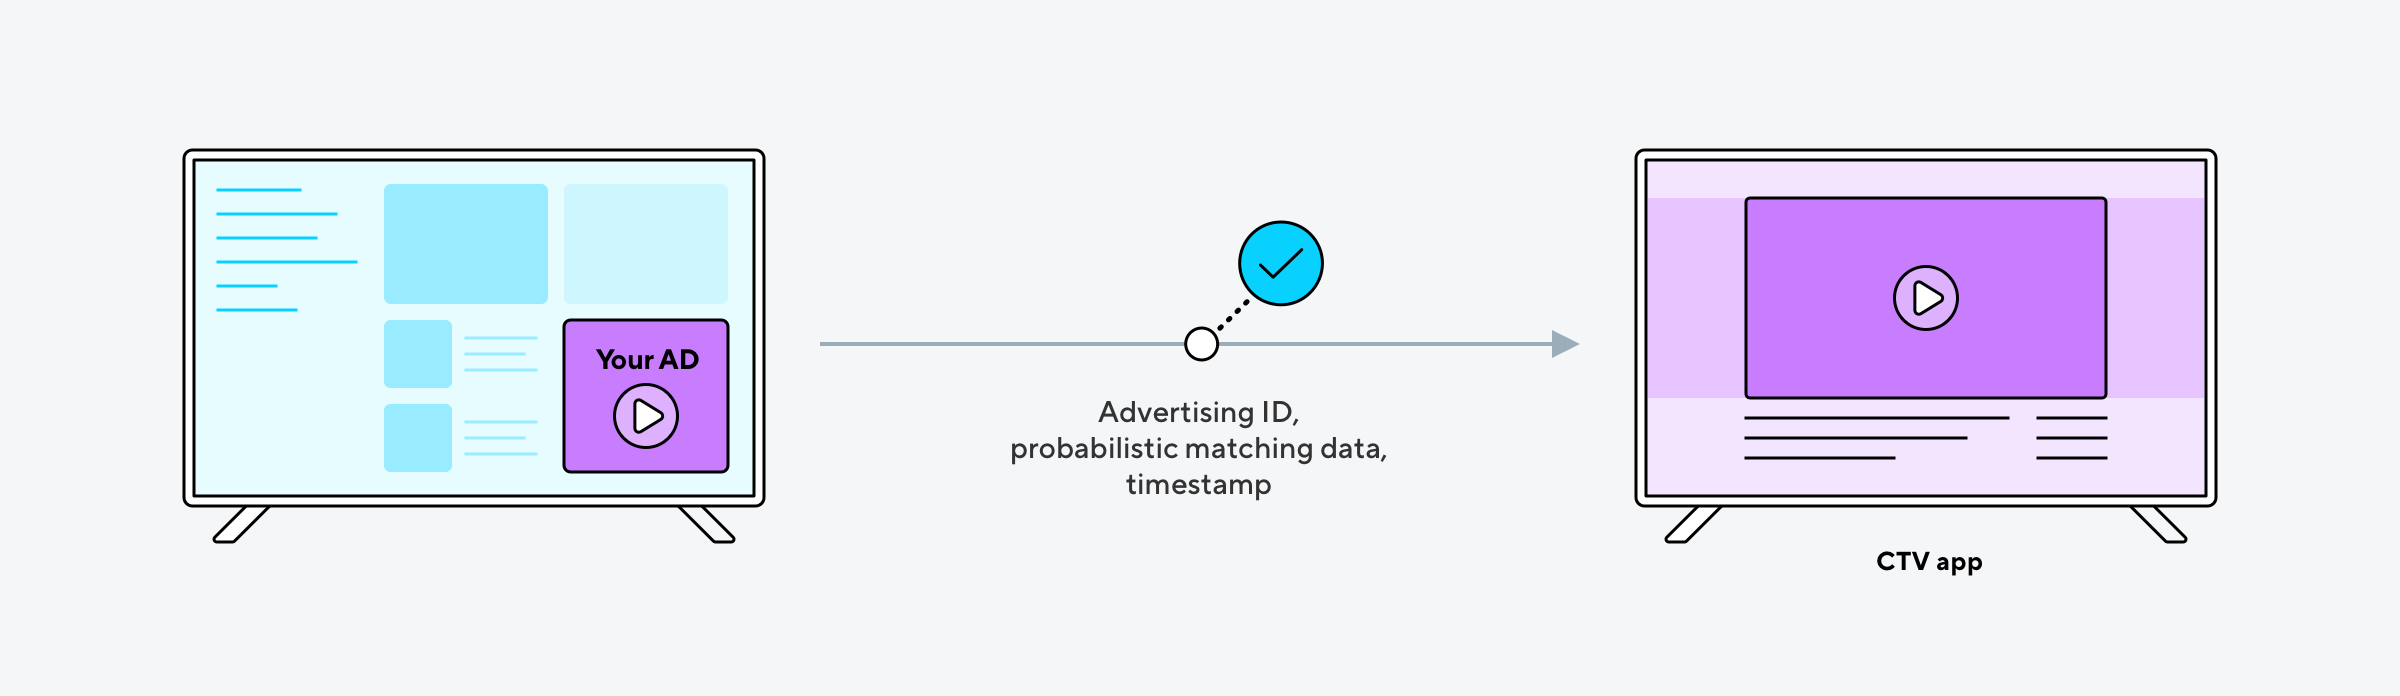 A graphic representing how attribution works for CTV campaigns promoting CTV apps.